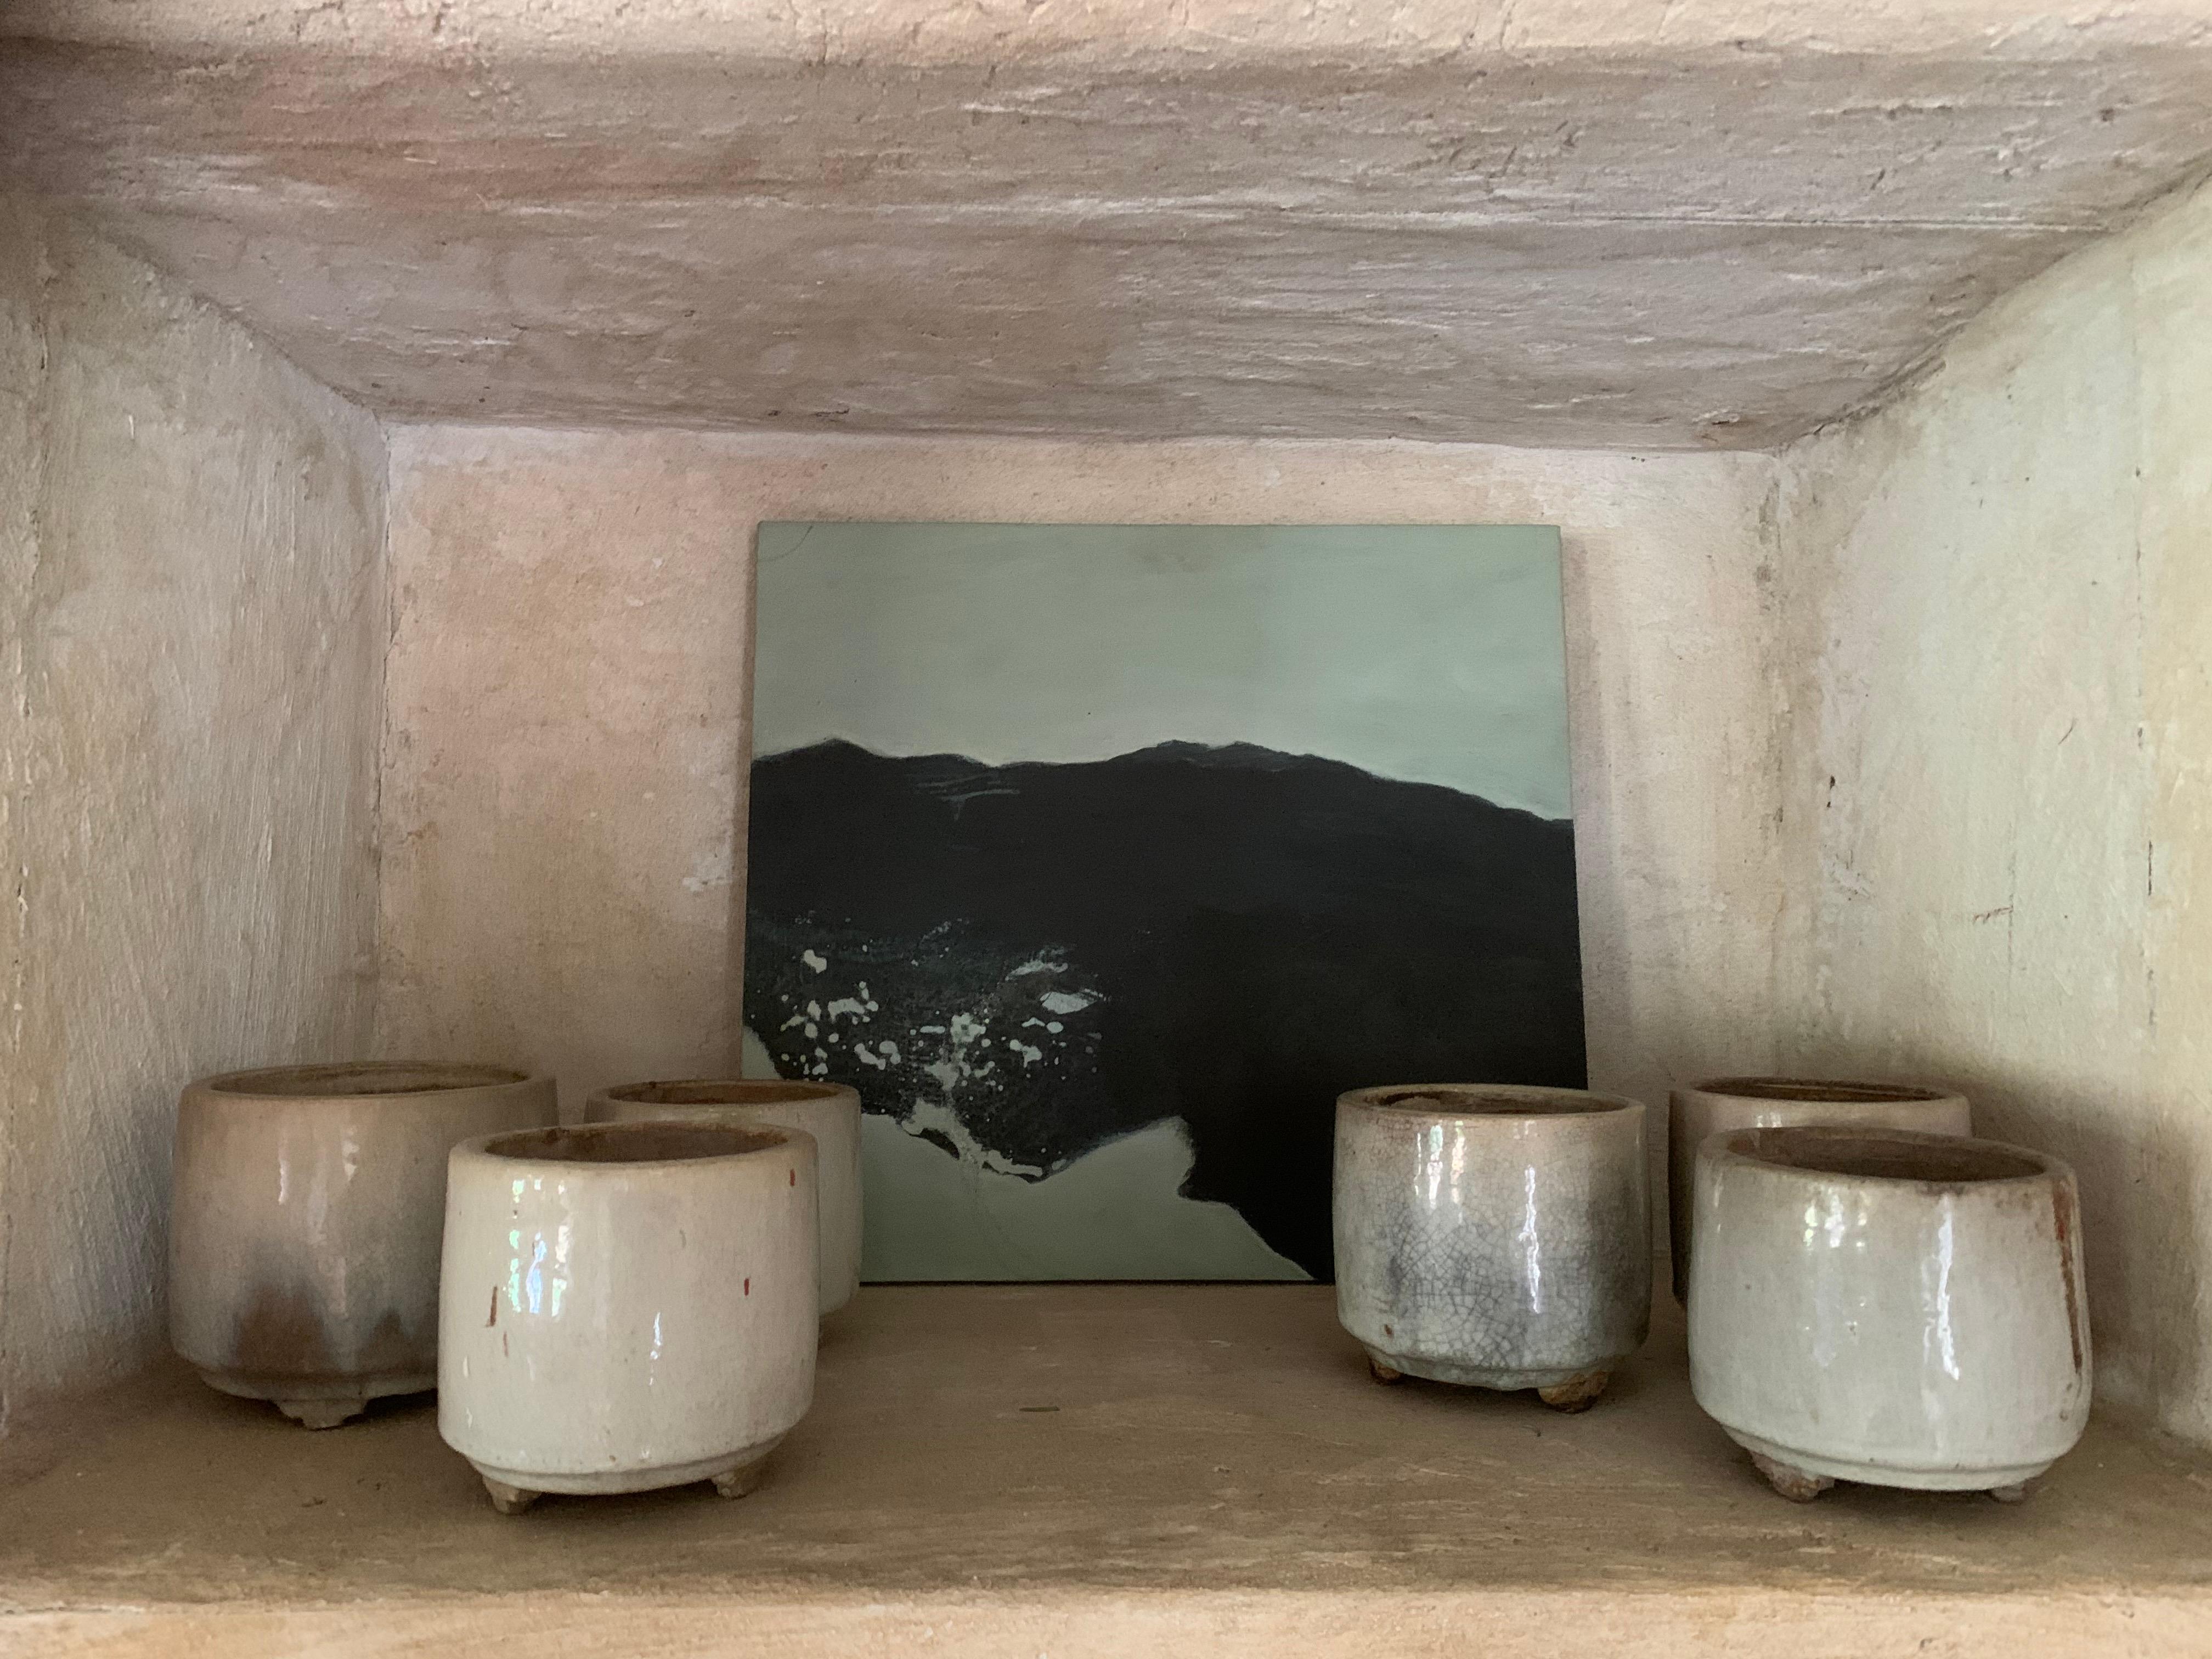 A set of 6 19th century Celadon Incense burner pots. These small pots were used in shrines and tempels to burn incense sticks. Filled up with sand the sticks could be pushed in. Not one is the same but all have beautiful celadon shades with great